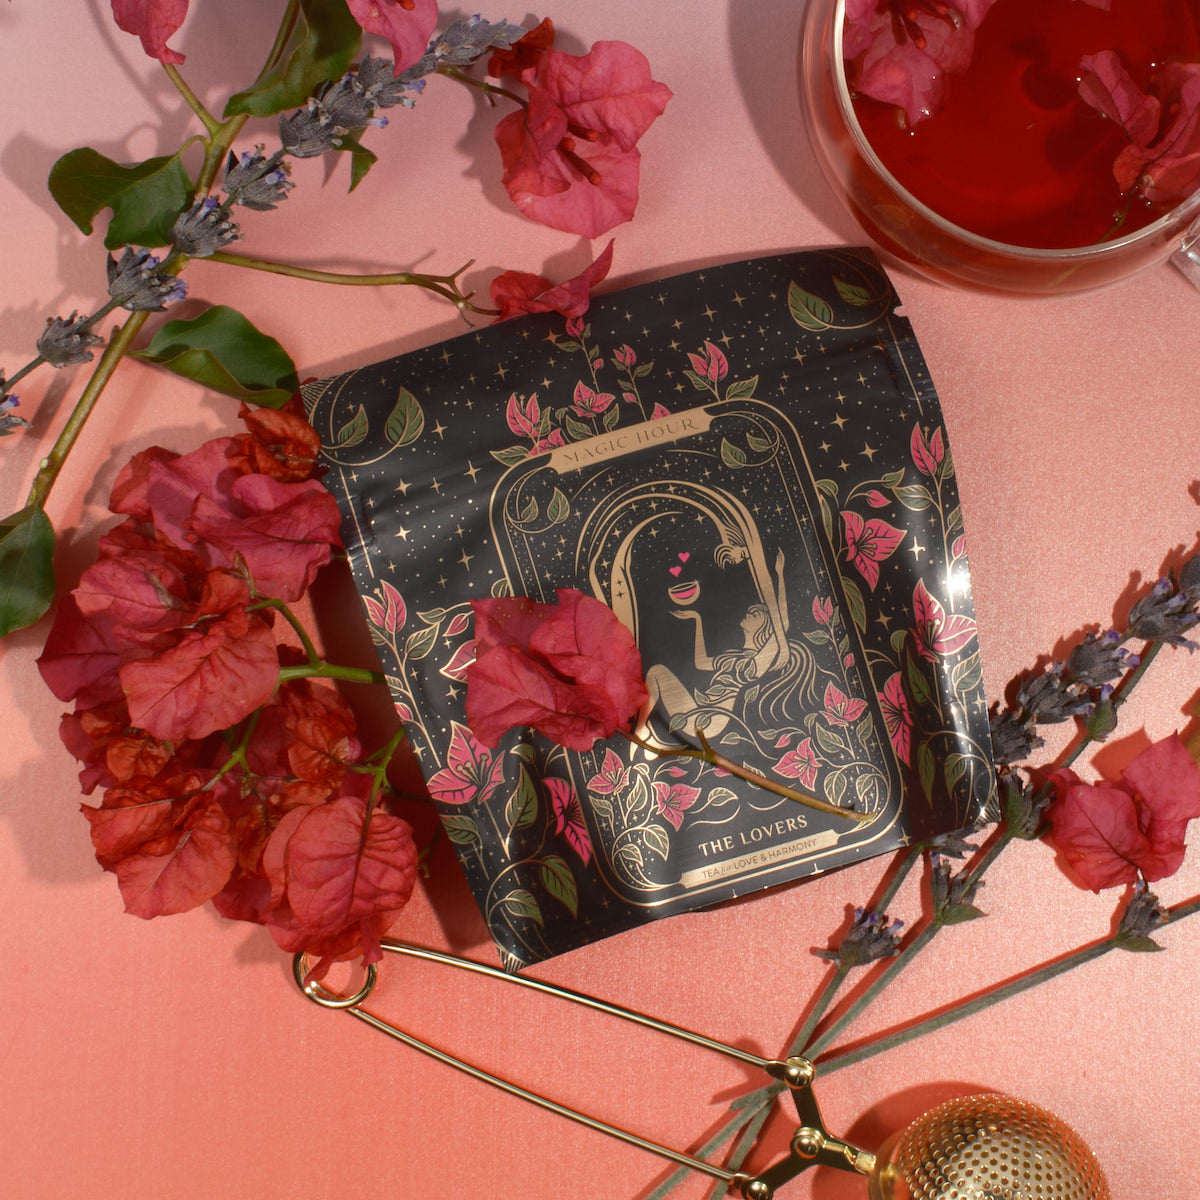 A packet of tea labeled &quot;The Lovers&quot; from Magic Hour is surrounded by red flowers and lavender sprigs on a gradient pink background. A golden tea infuser and a clear cup of red tea with Organic Hibiscus are also positioned nearby. The packet has an intricate, artistic design.